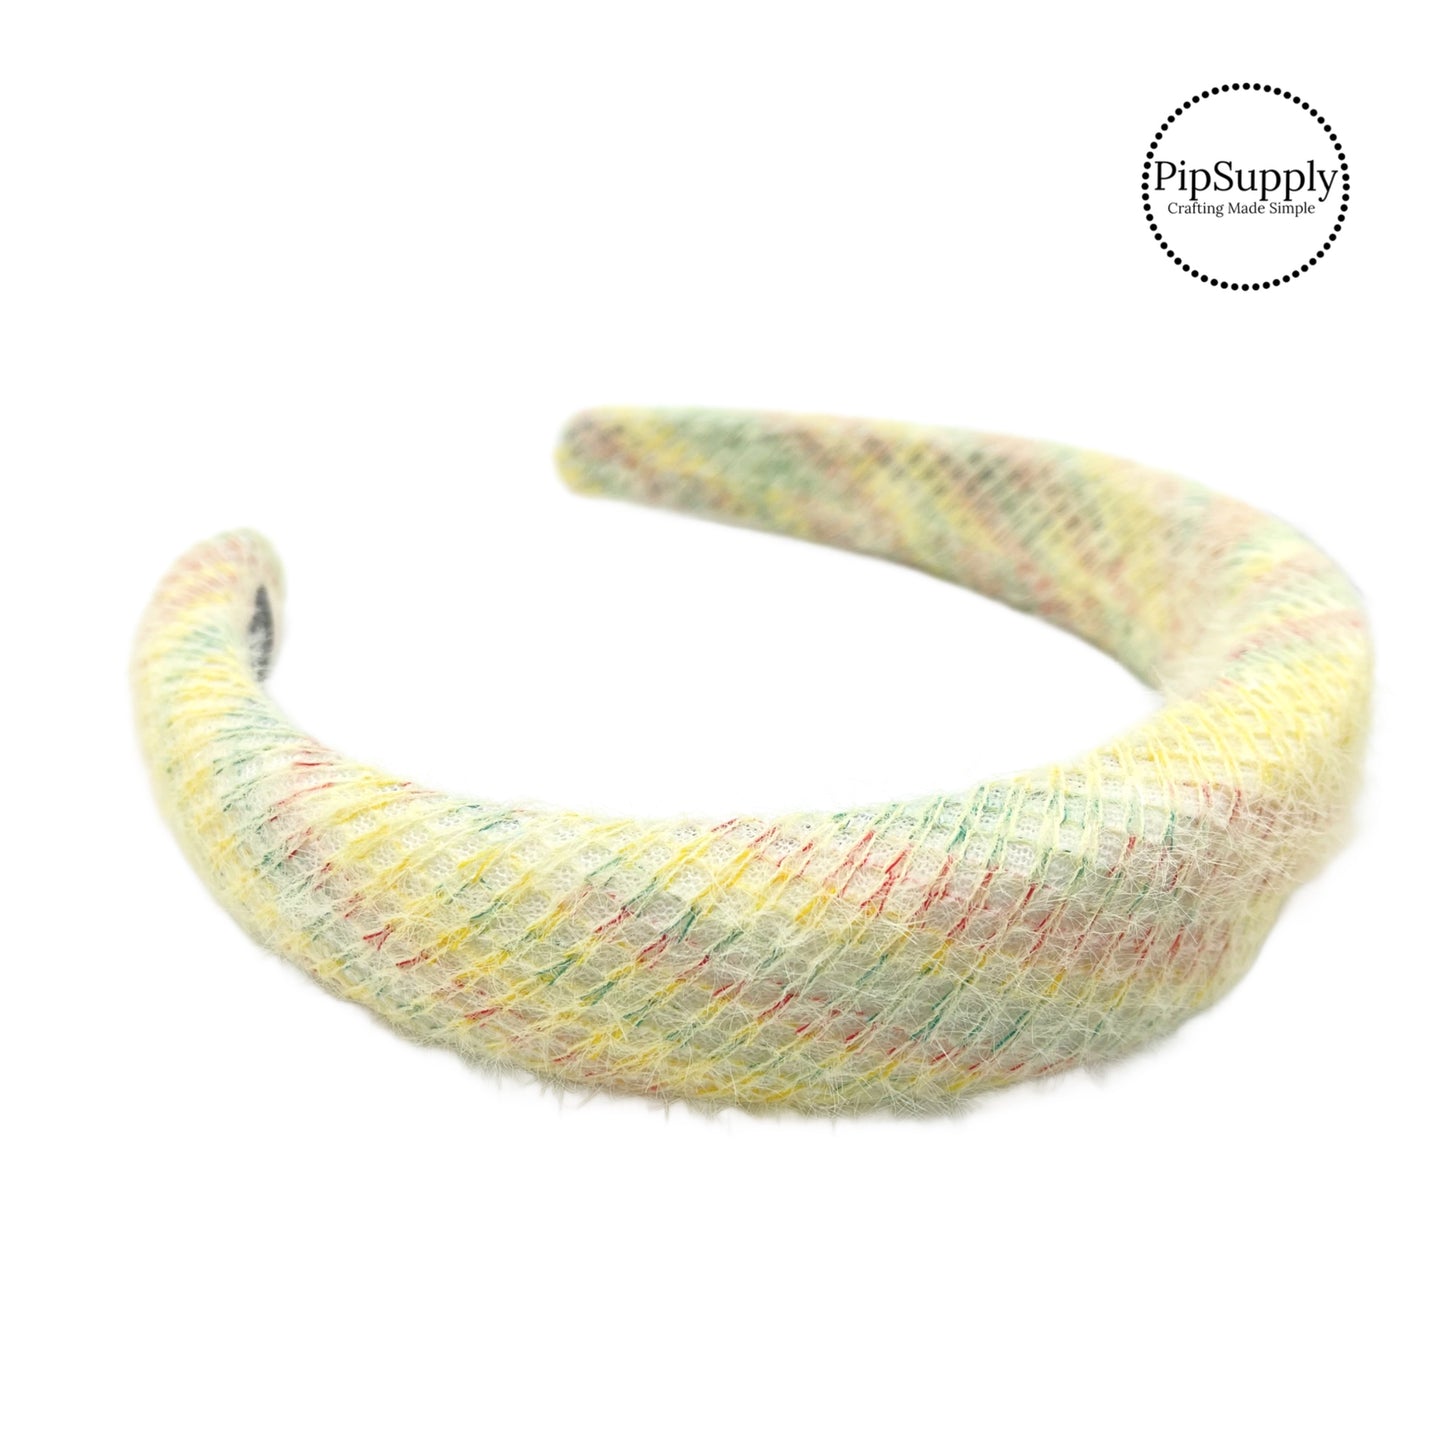 These yellow mix soft padded headbands are a stylish hair accessory and have the on and off ease of a headband. These spring themed headbands are a perfect simple and fashionable answer to keeping your hair back!